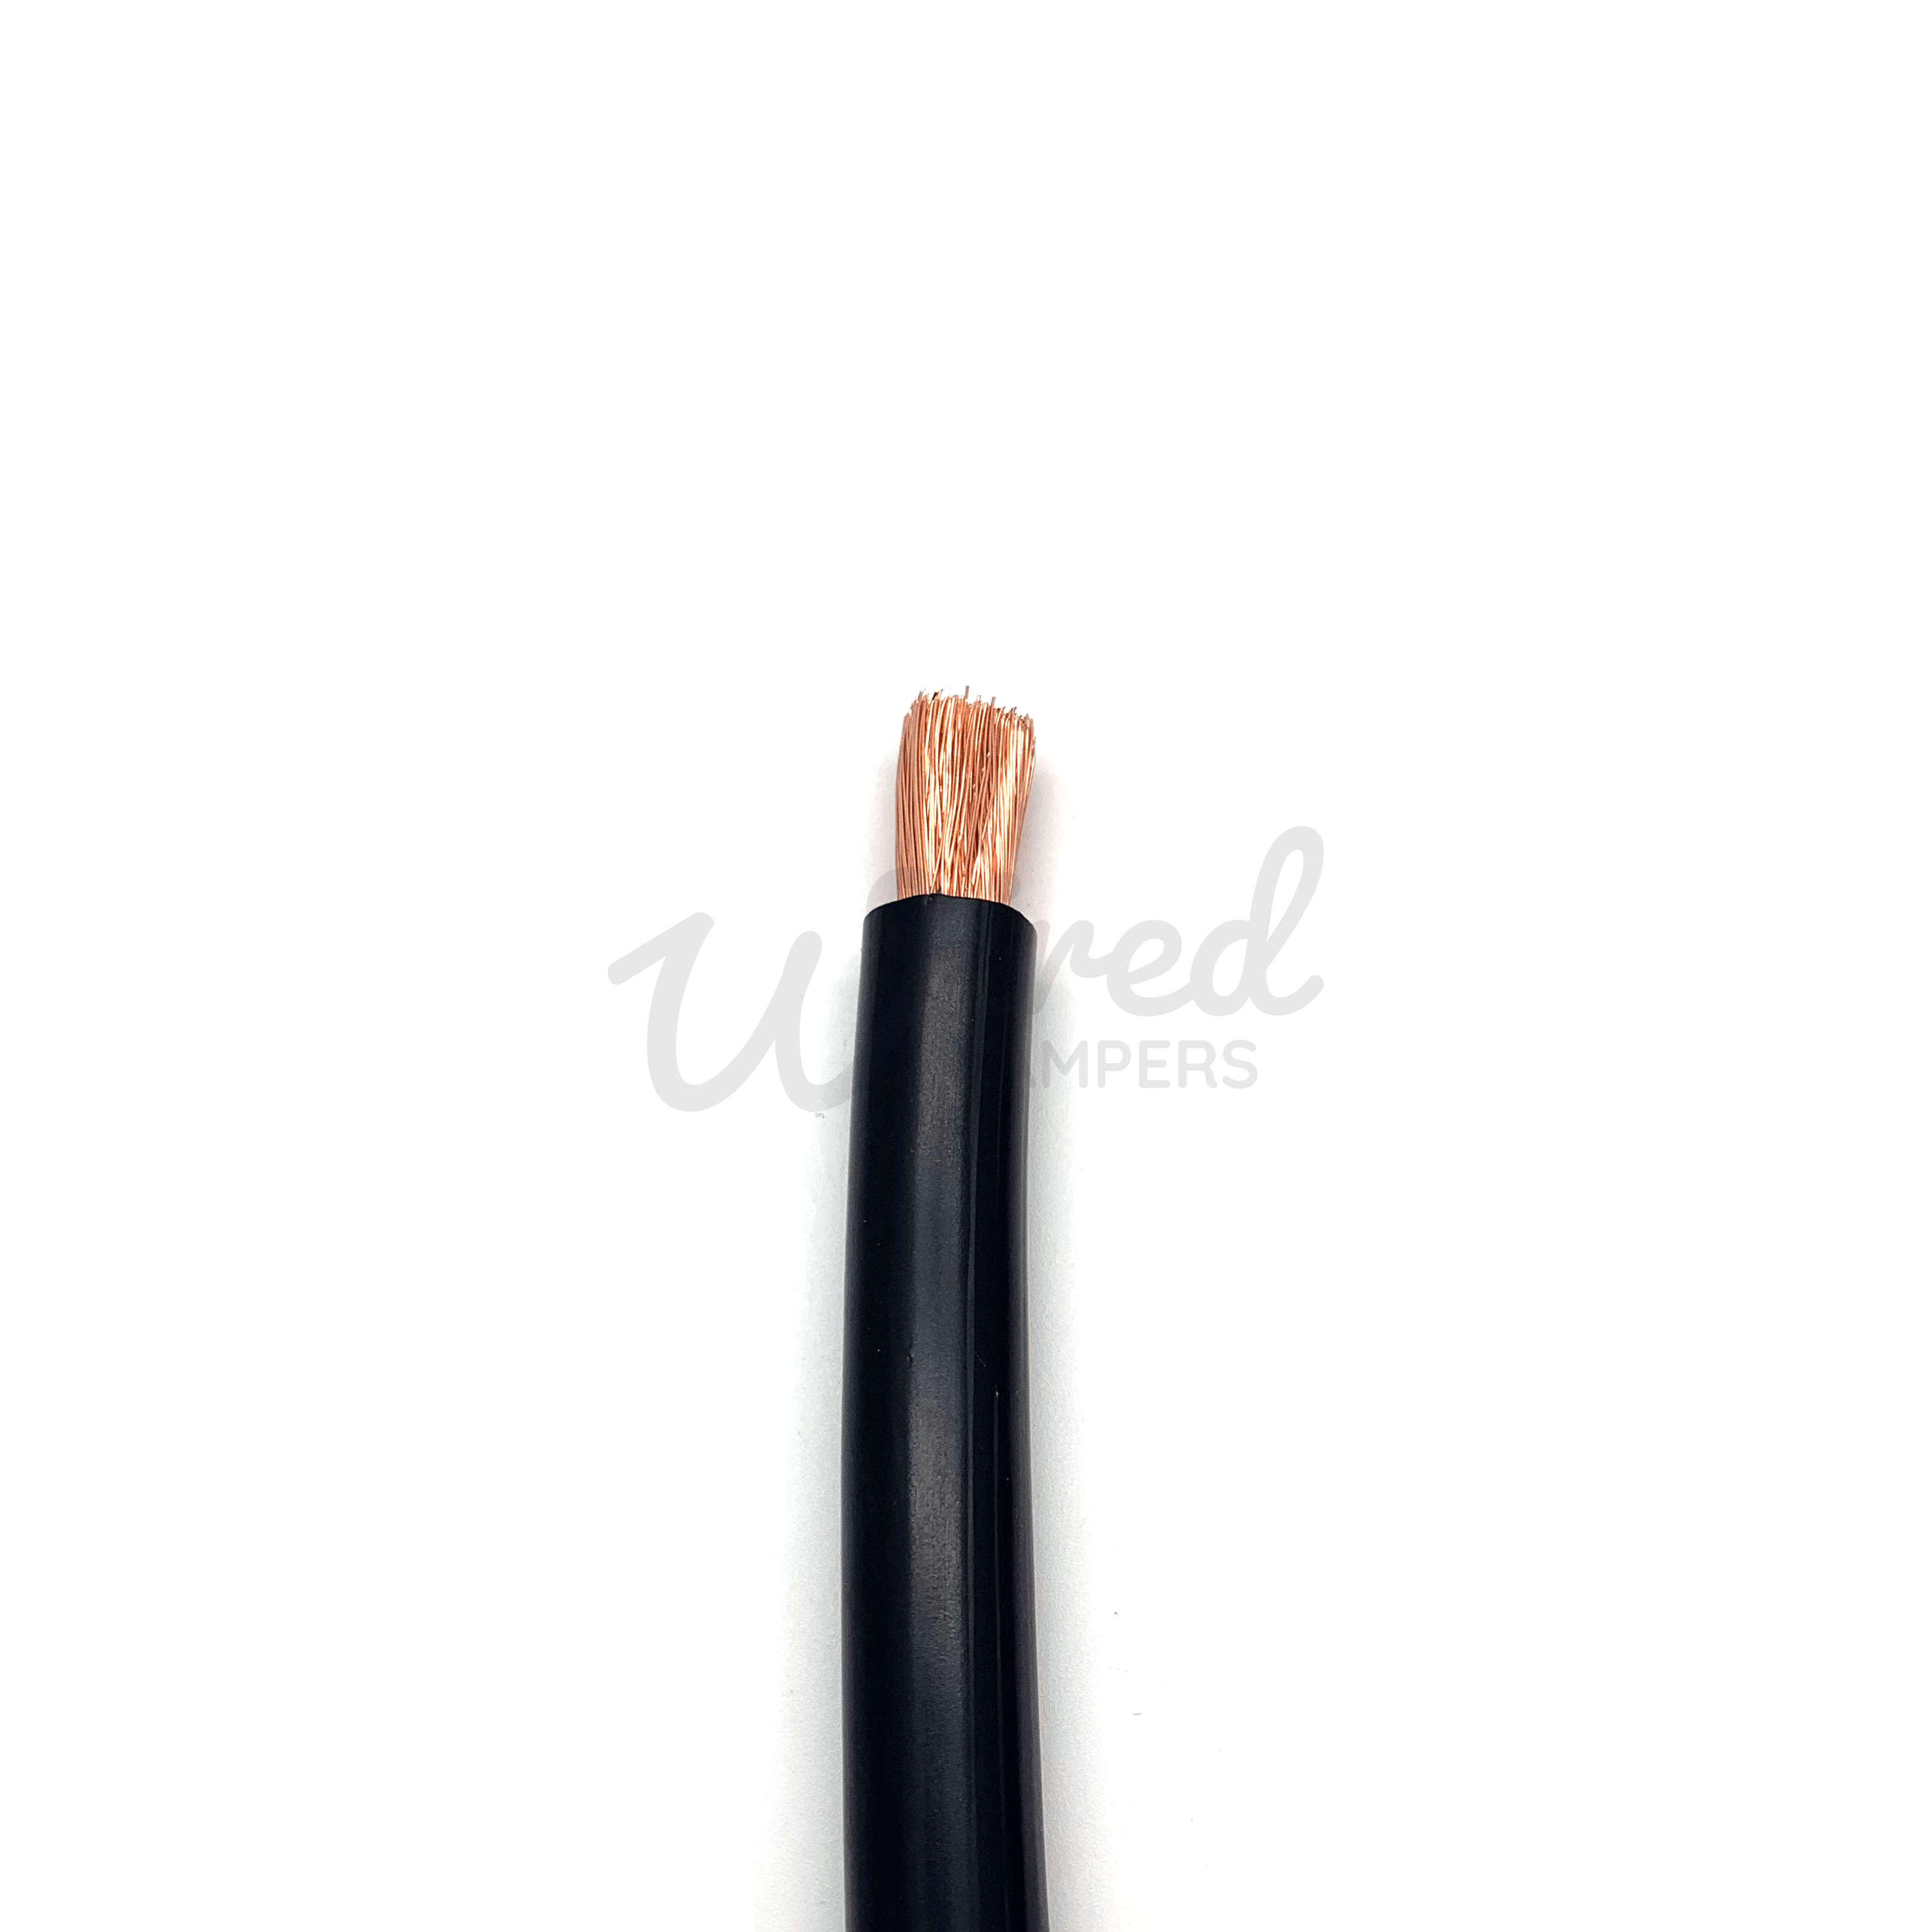 Wired Campers Limited 25mm2 170A Hi-Flex Battery/Welding/Inverter Flexible Cable - Black Negative